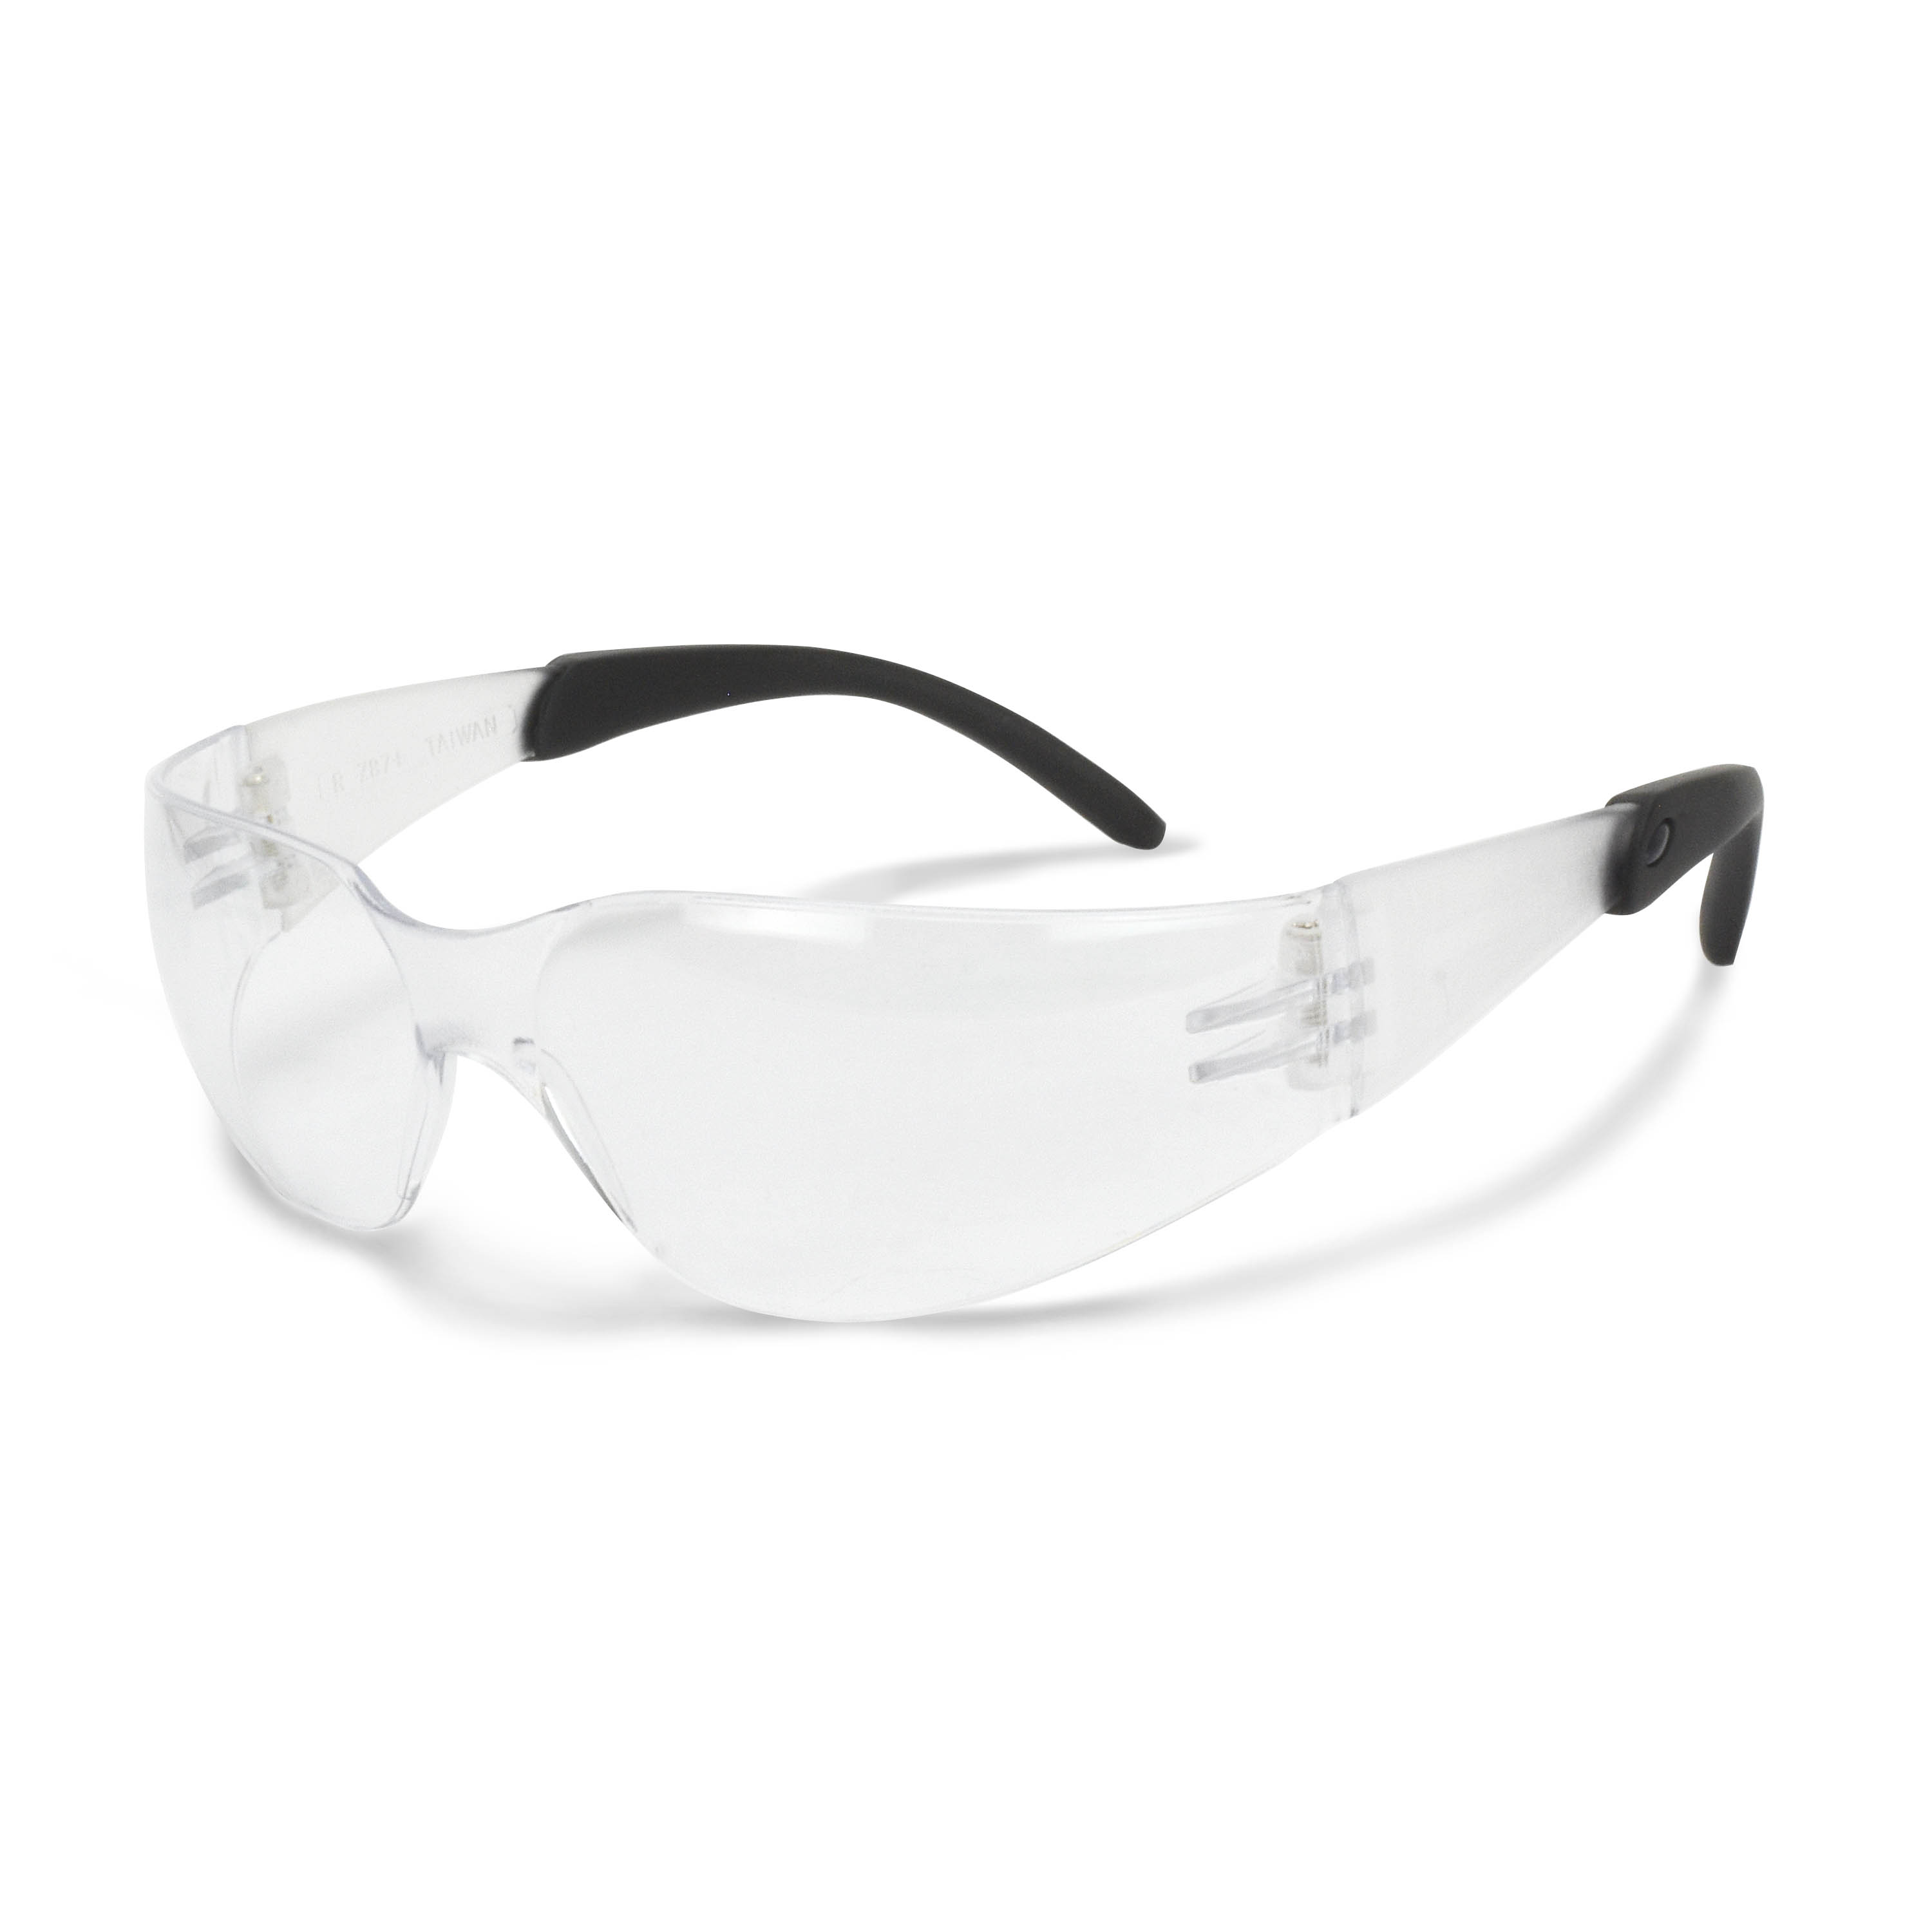 Mirage RT™ Safety Eyewear - Clear Frame - Clear Lens - Clear Lens